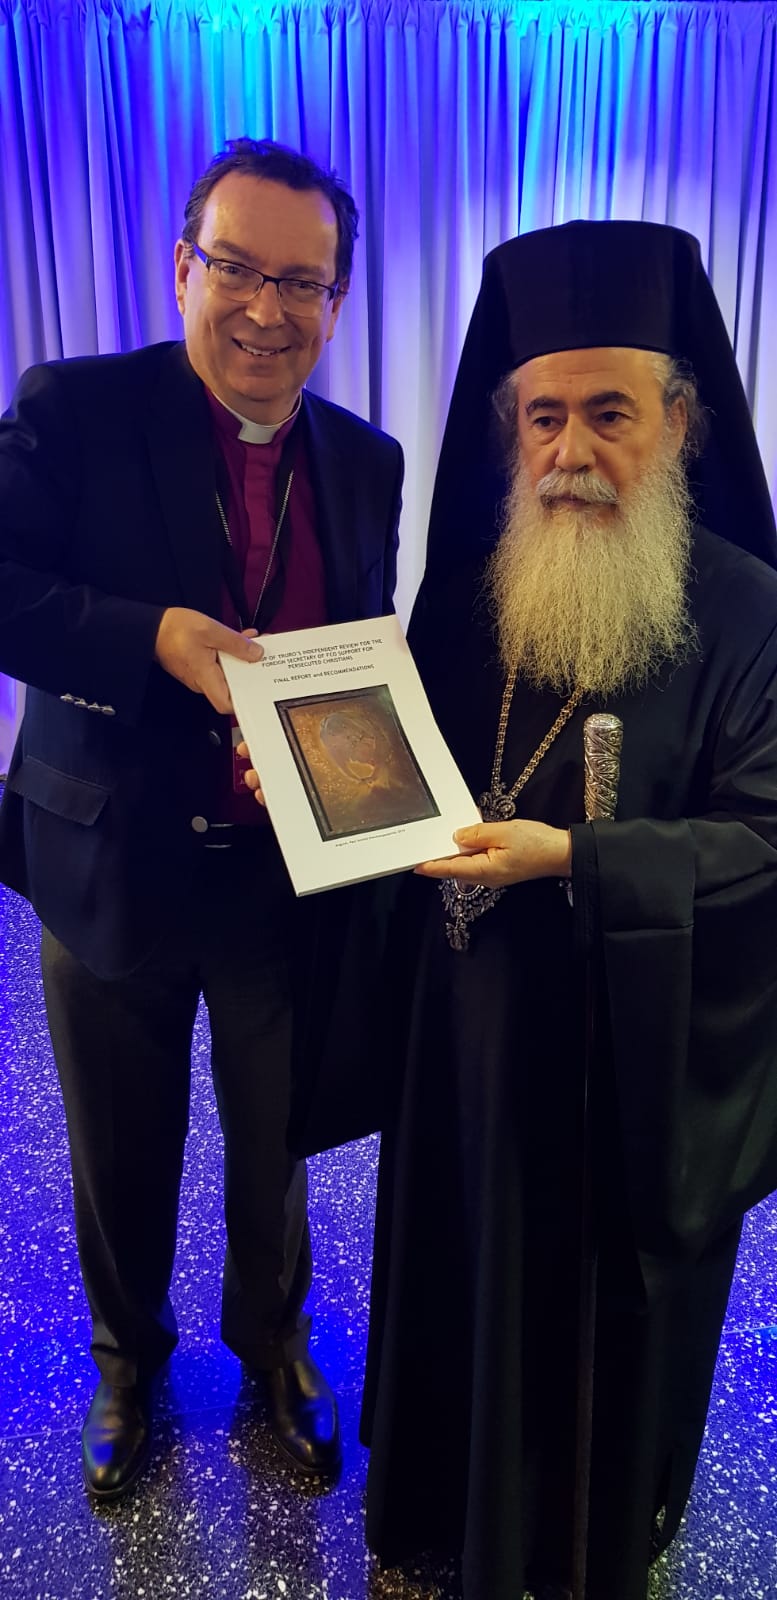 Bishop Philip Mounstephen with the Patriarch of Jerusalem.